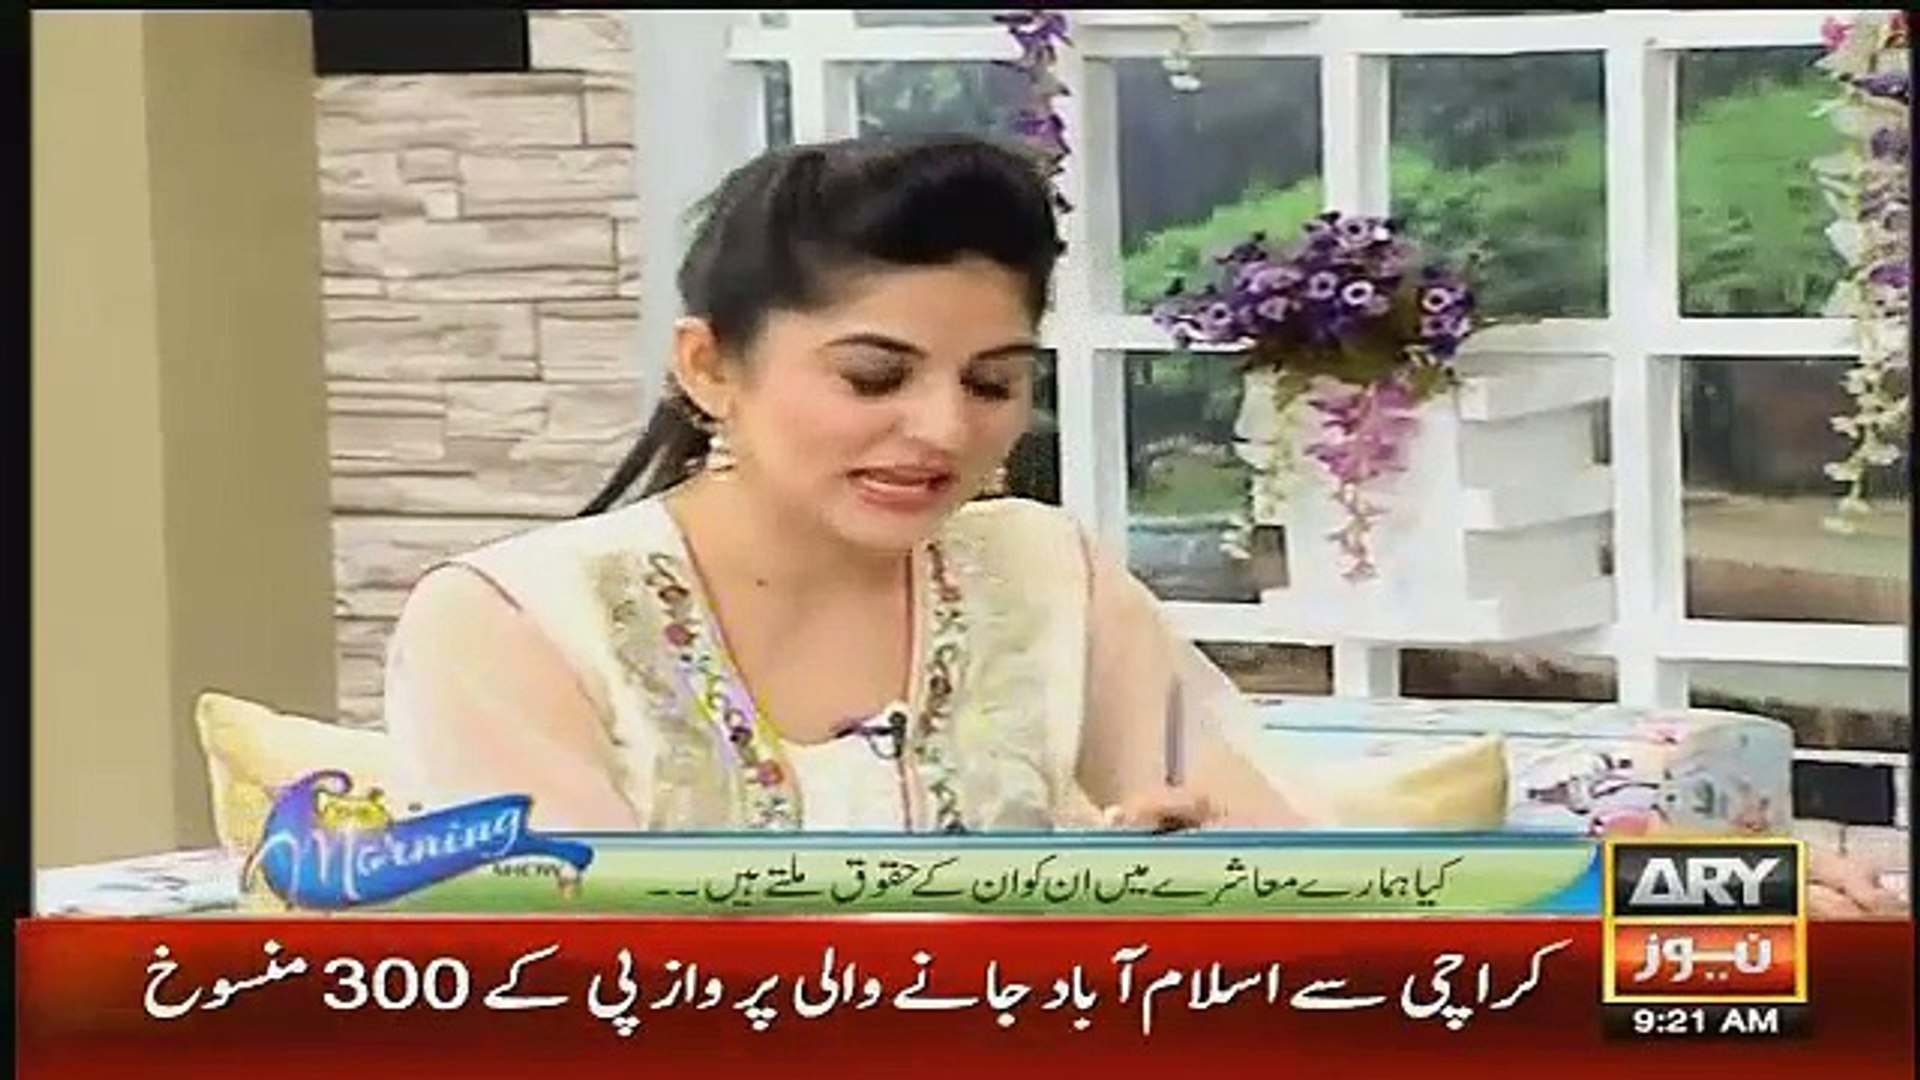 The Morning Show With Sanam Baloch -4th February 2016 - Part 1 - - video  Dailymotion